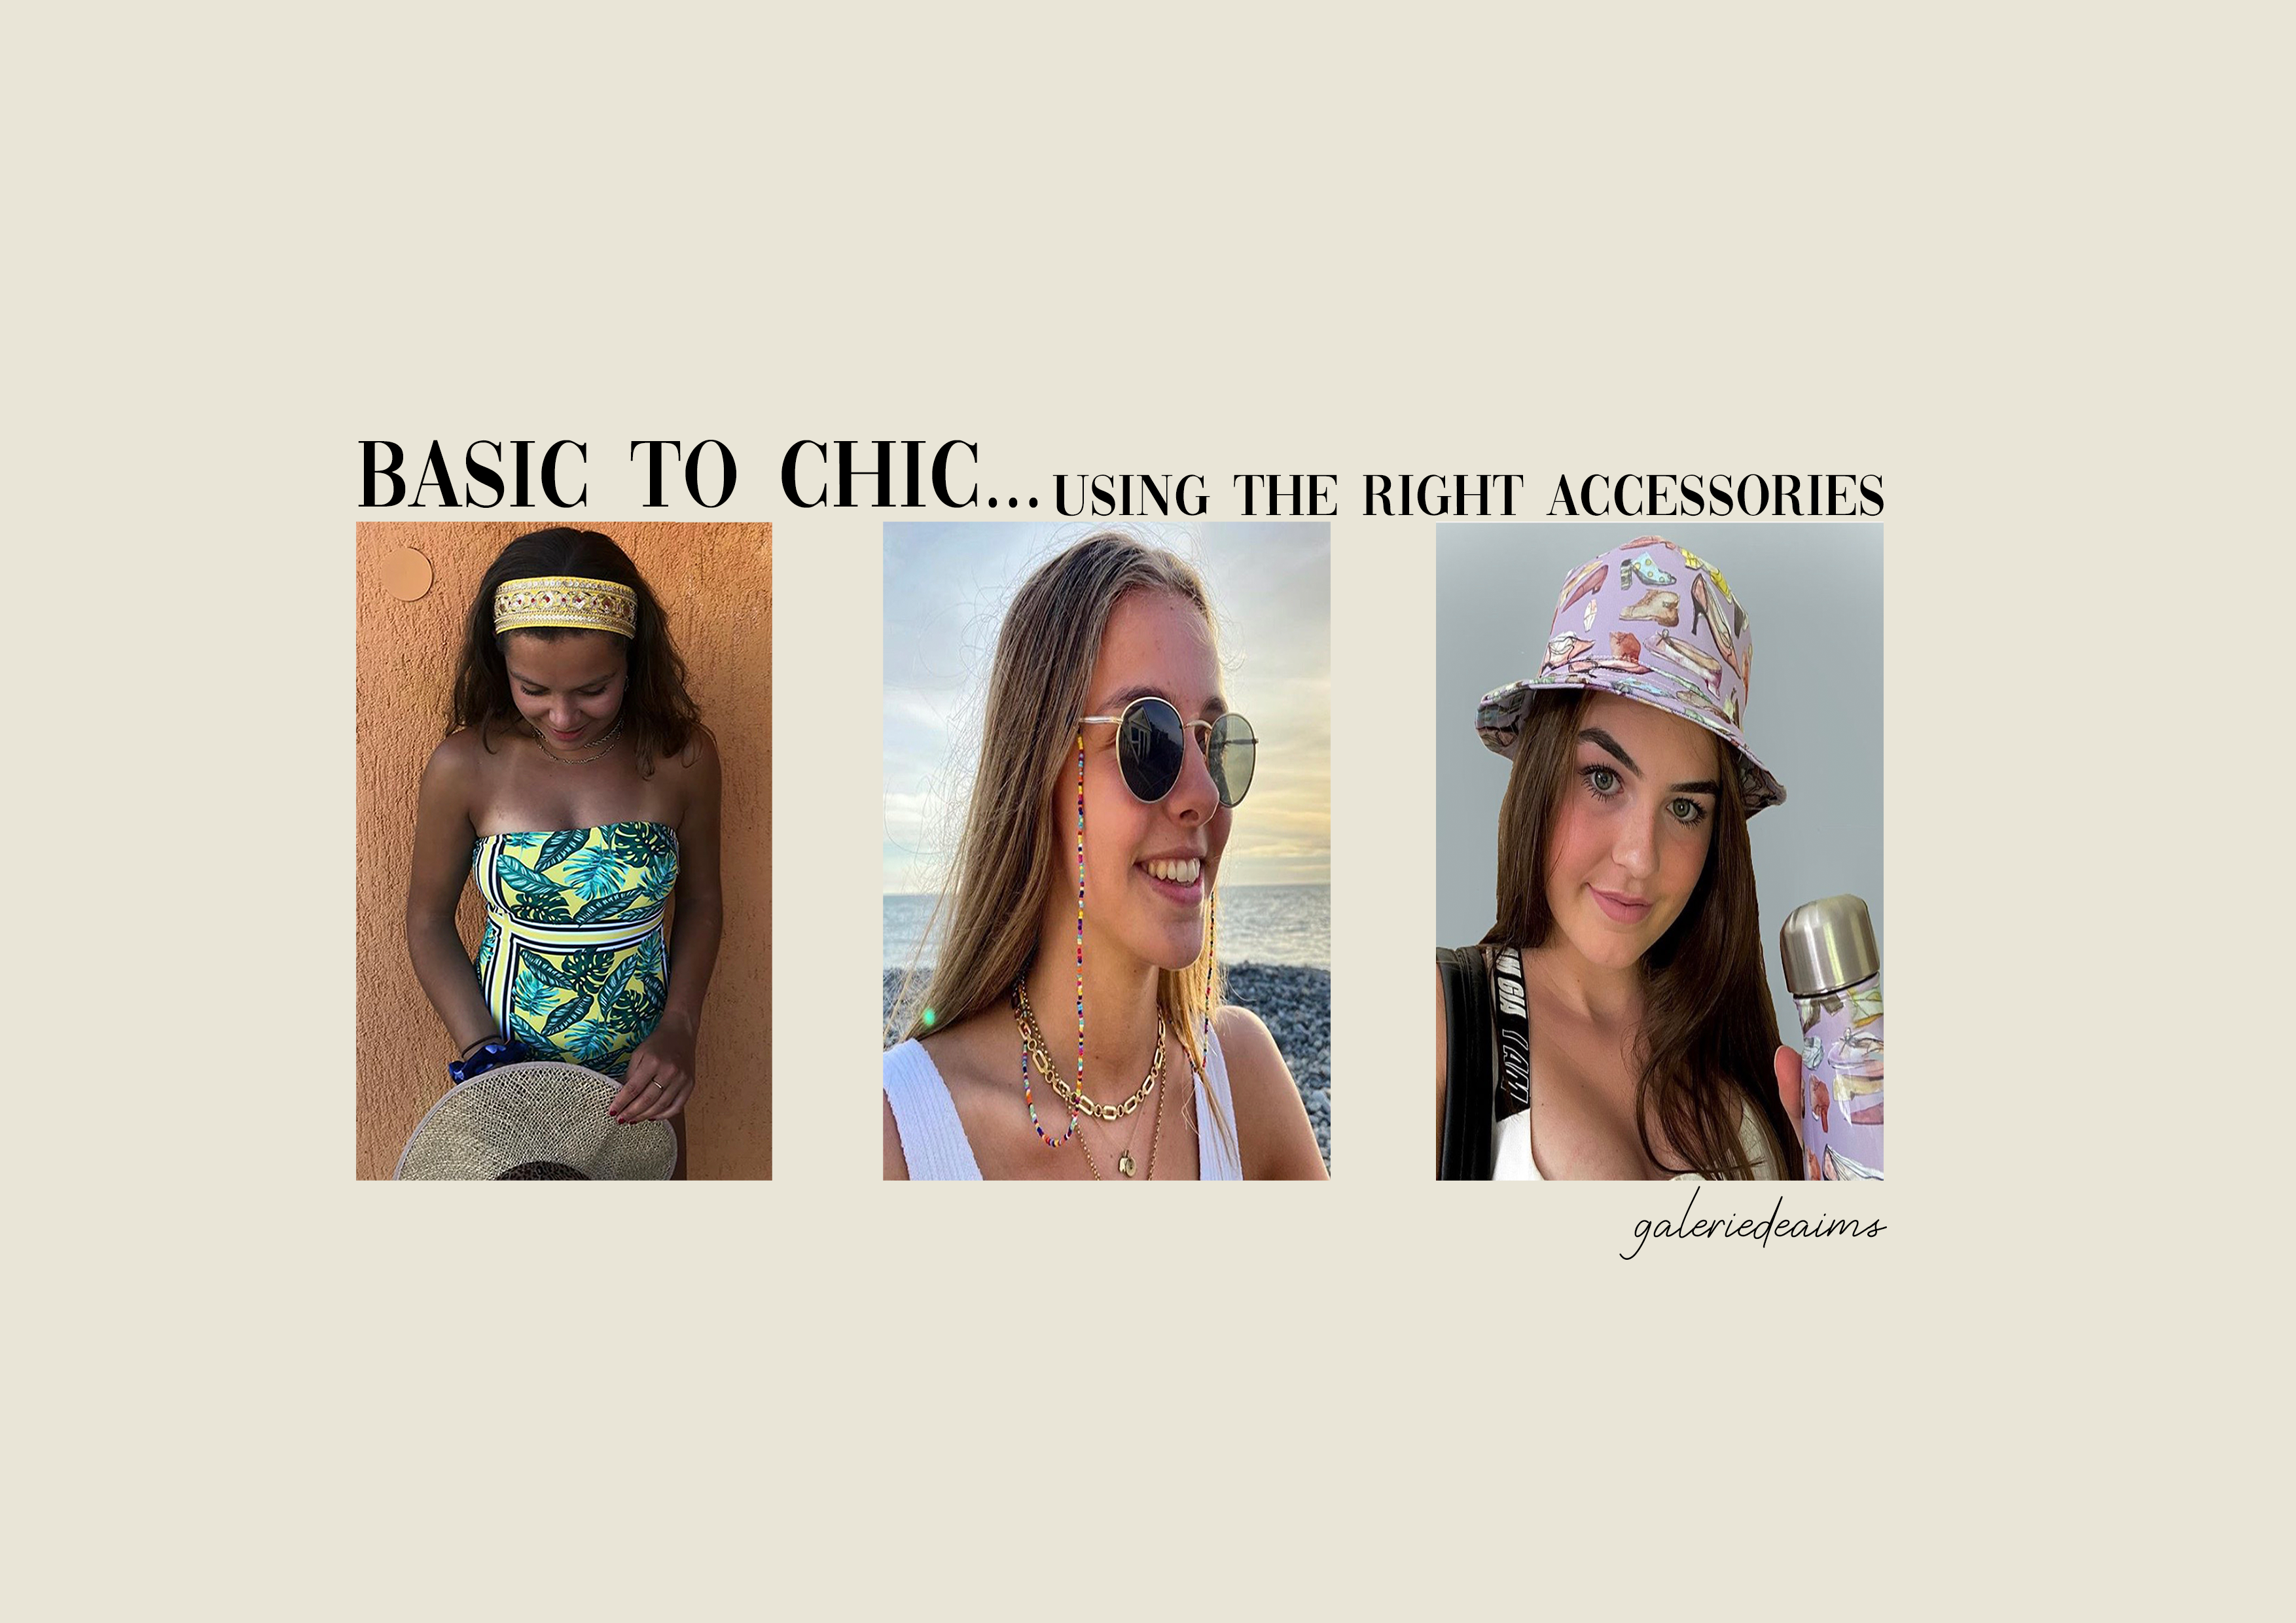 Basic to chic… using the right accessories.